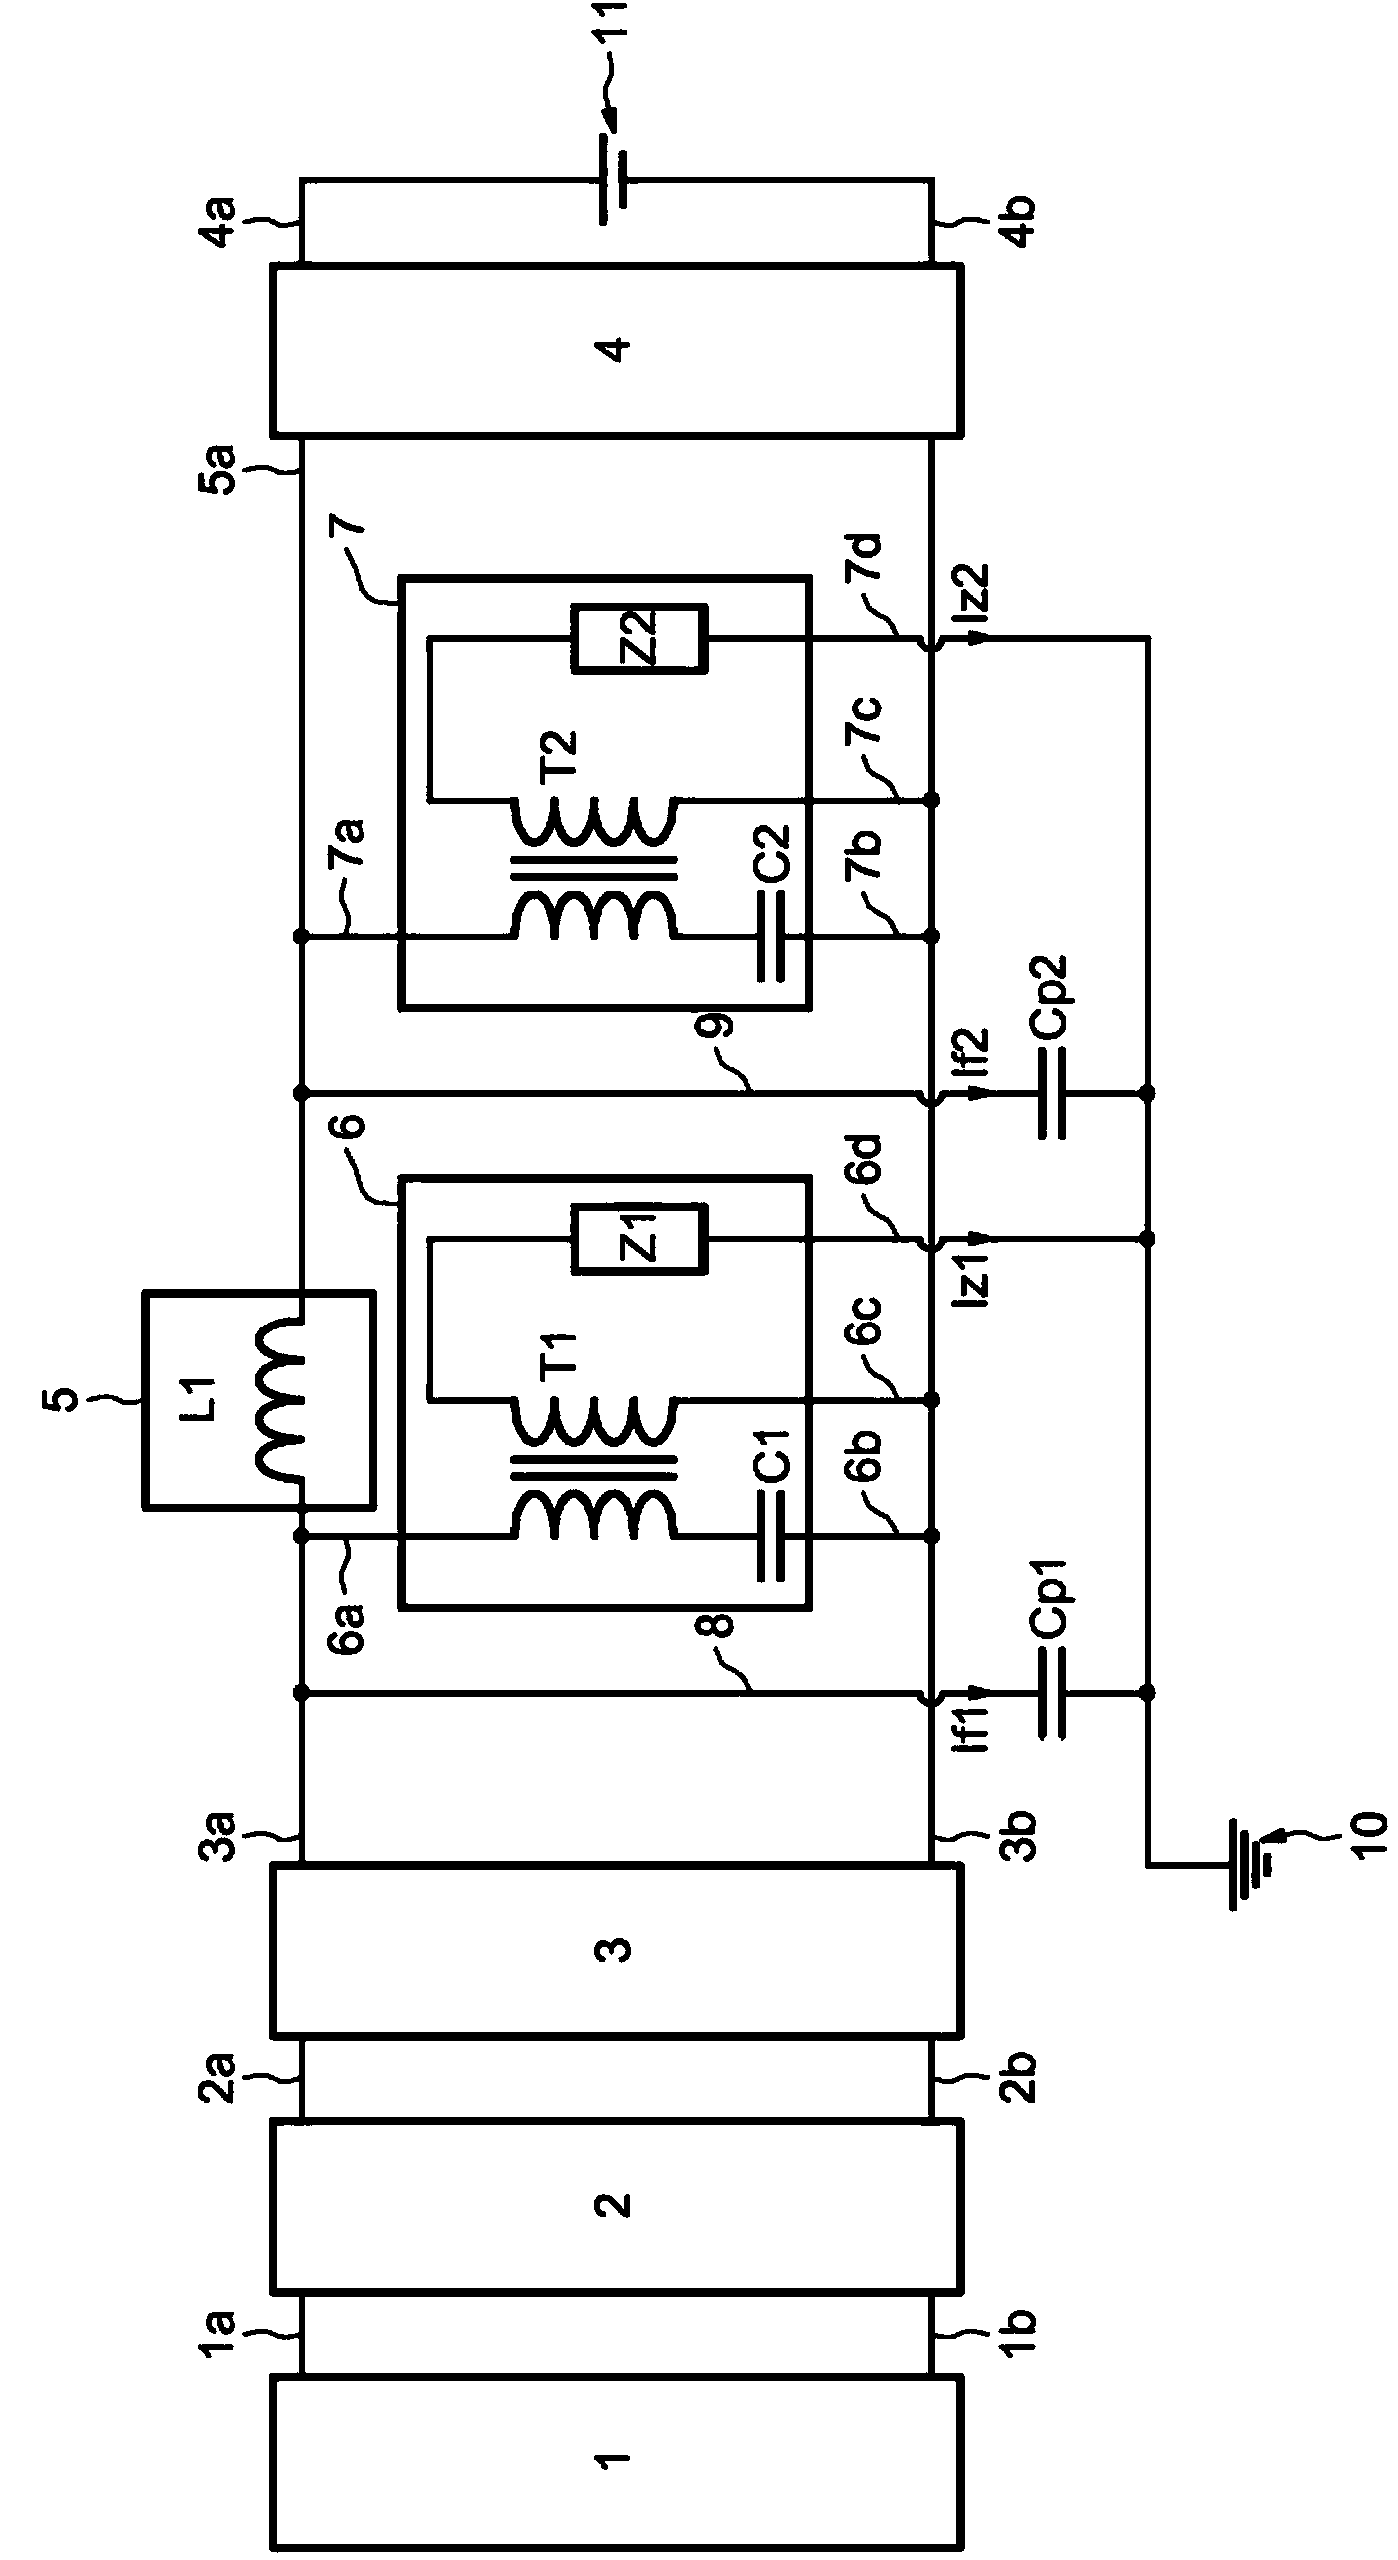 System and method for compensating for high-frequency leakage currents in a motor vehicle